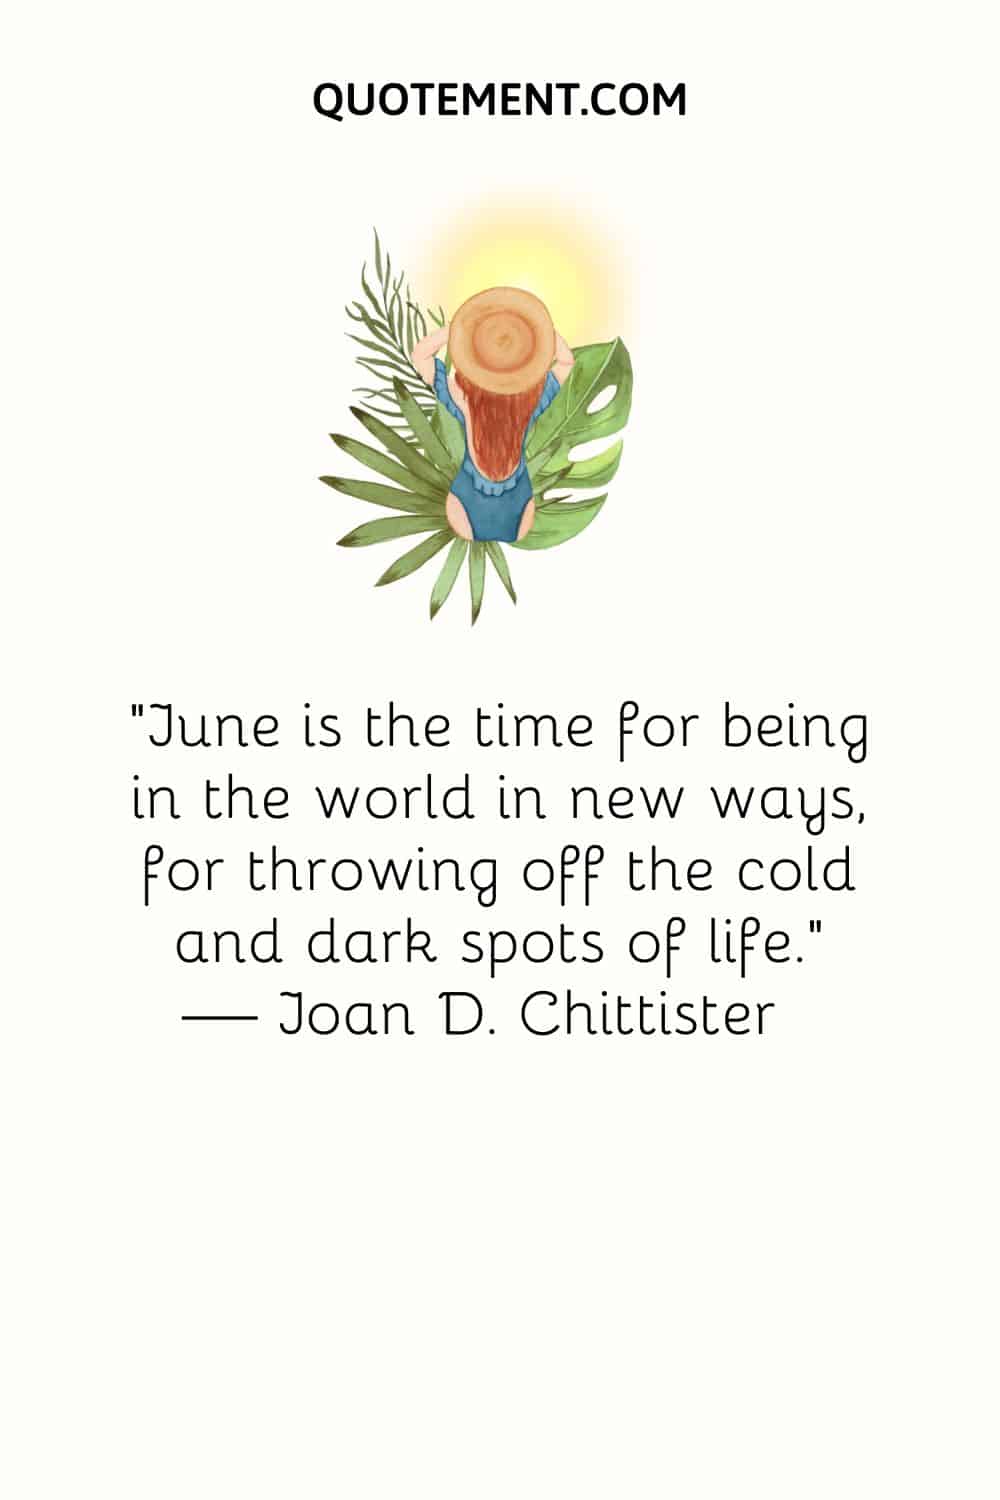 a girl sitting on a leaf image representing a positive quote for June